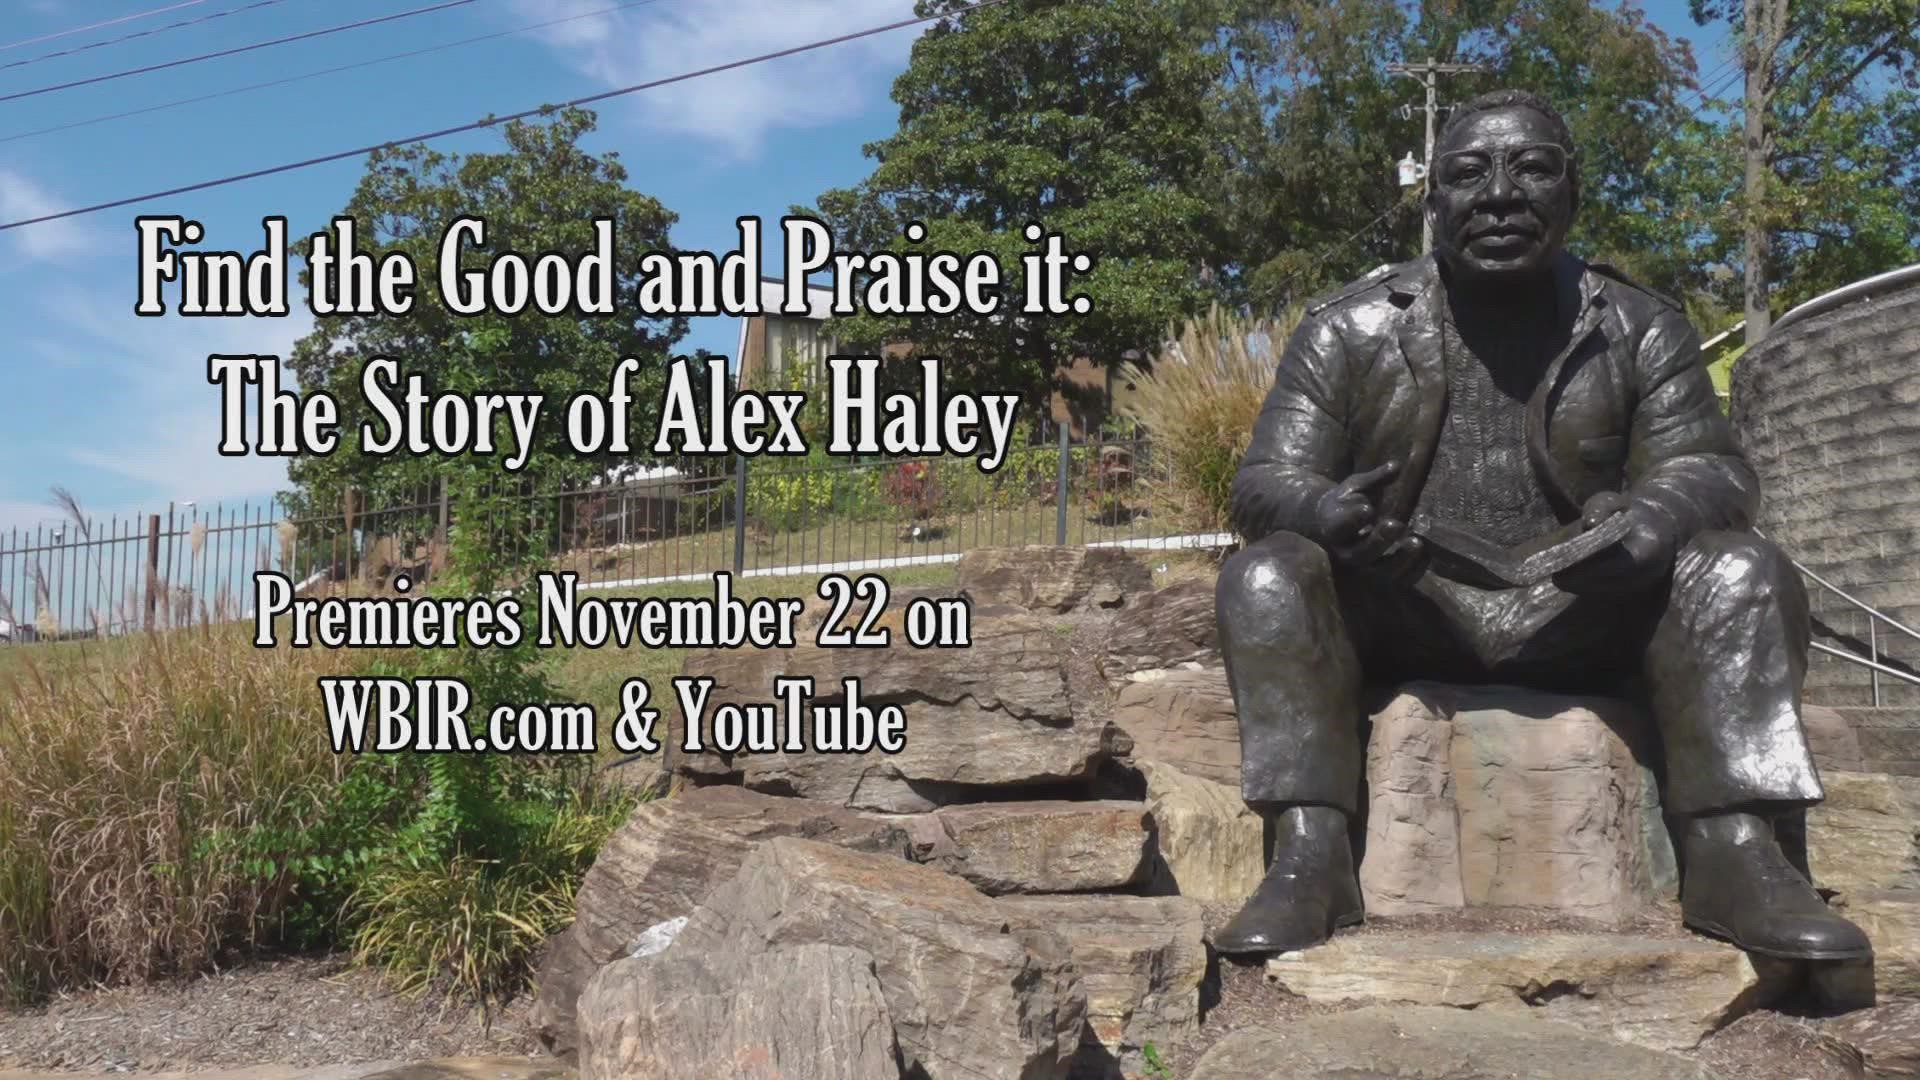 "Find the Good and Praise It: The Story of Alex Haley" will premiere on November 22 on YouTube and WBIR.com.